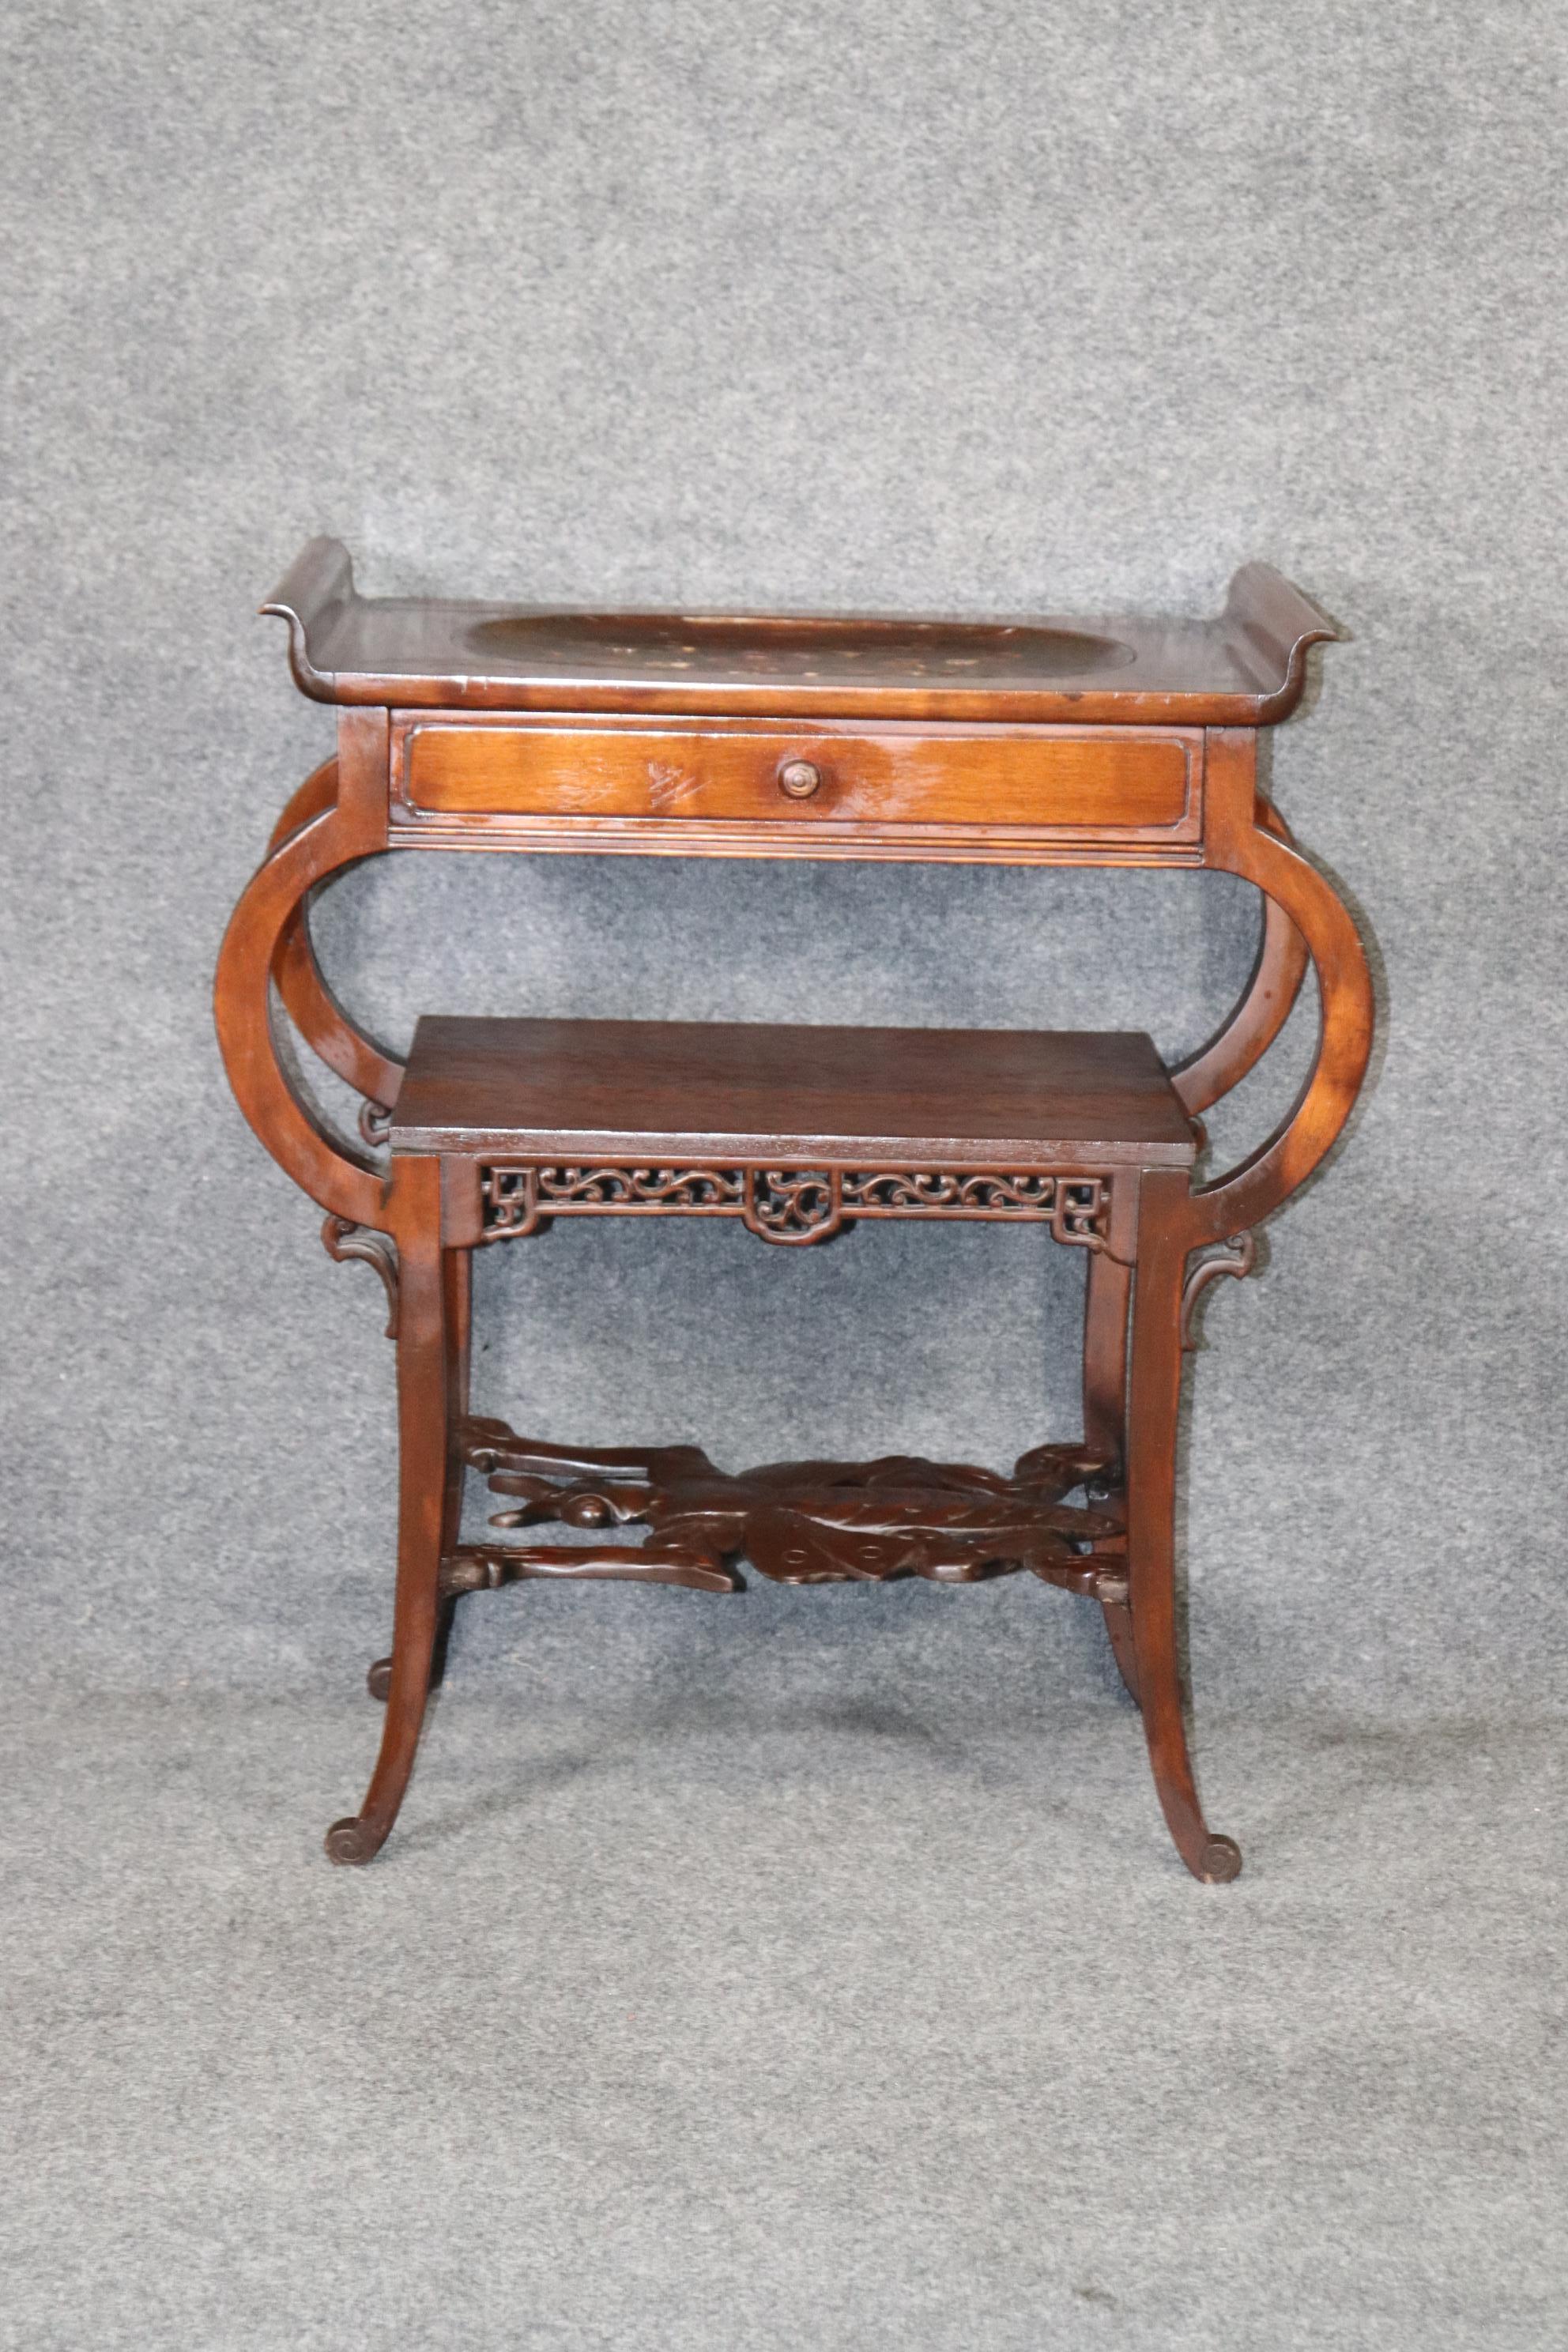 Dimensions- H: 31in W: 27 1/4in D: 16in
This is an Exceptional piece of french furniture! Highly uncommon due to the fact that most of the time french furniture was made to look like french furniture. In this case This piece believed to be by Either